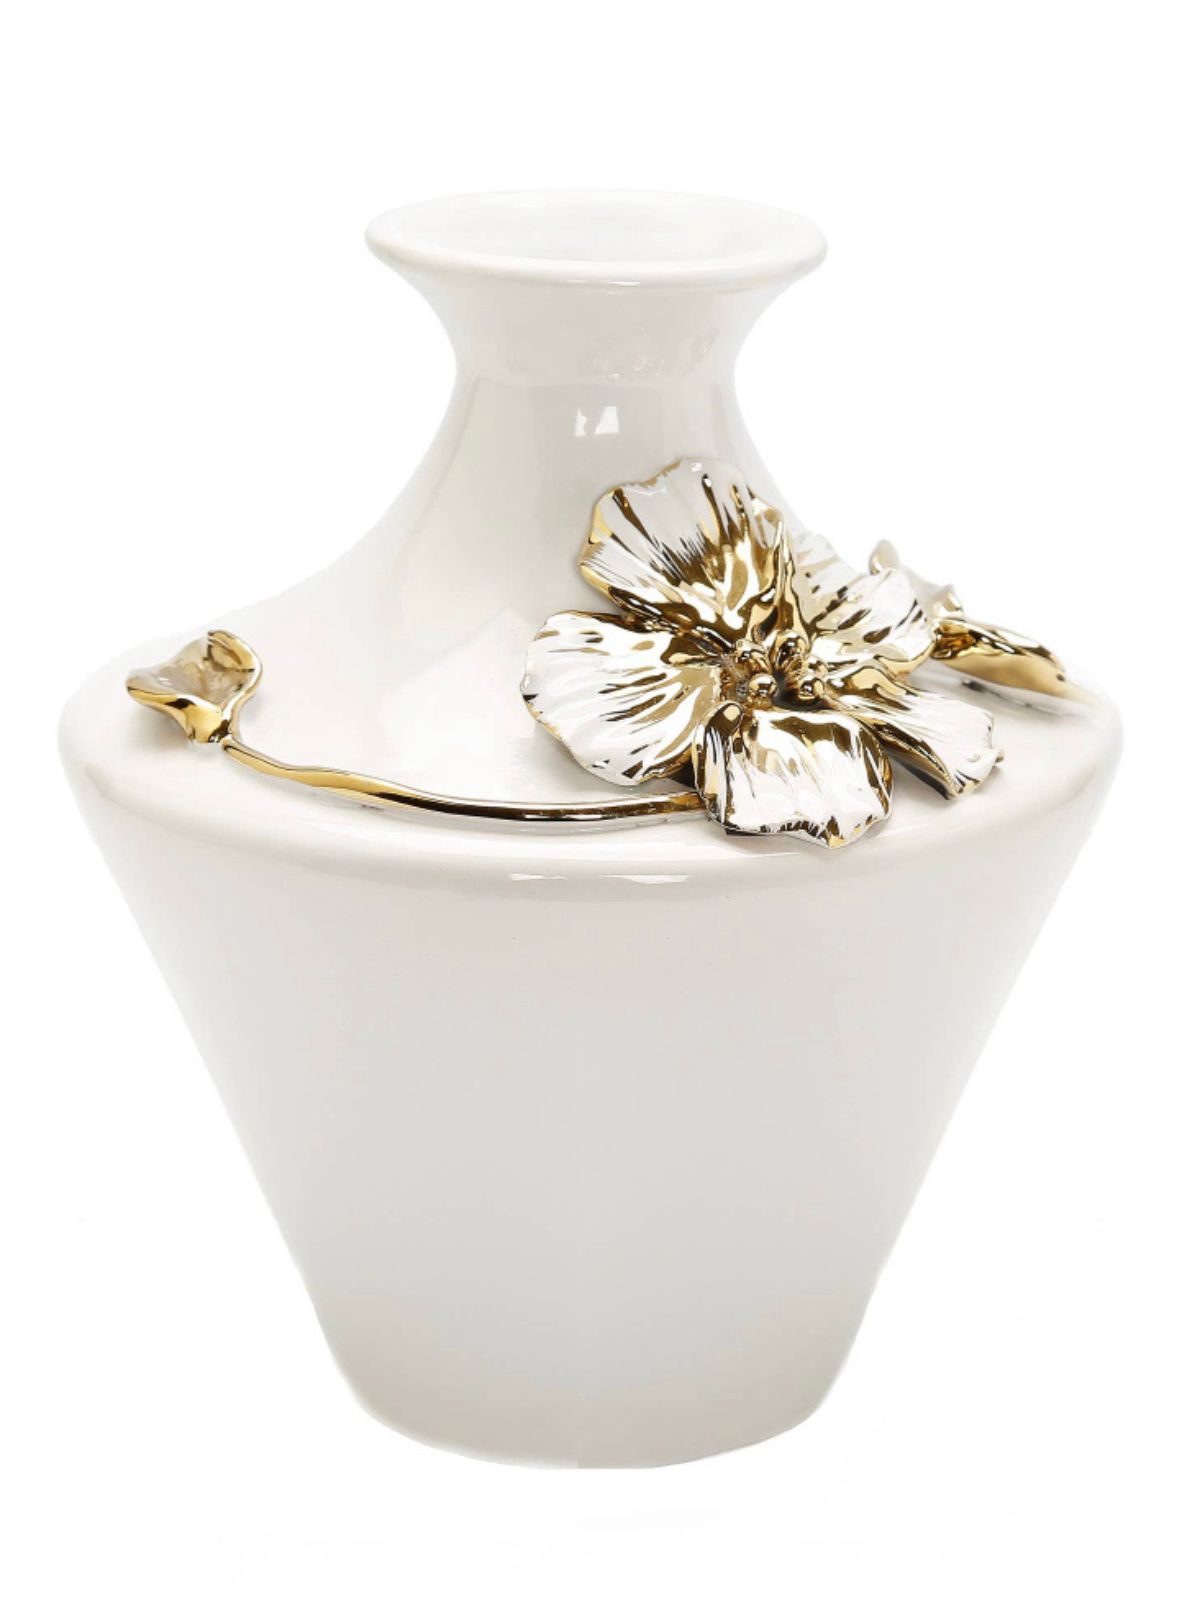 9H White Ceramic Decorative Vase with 3D Luxury Gold Floral Detail, Side View. 